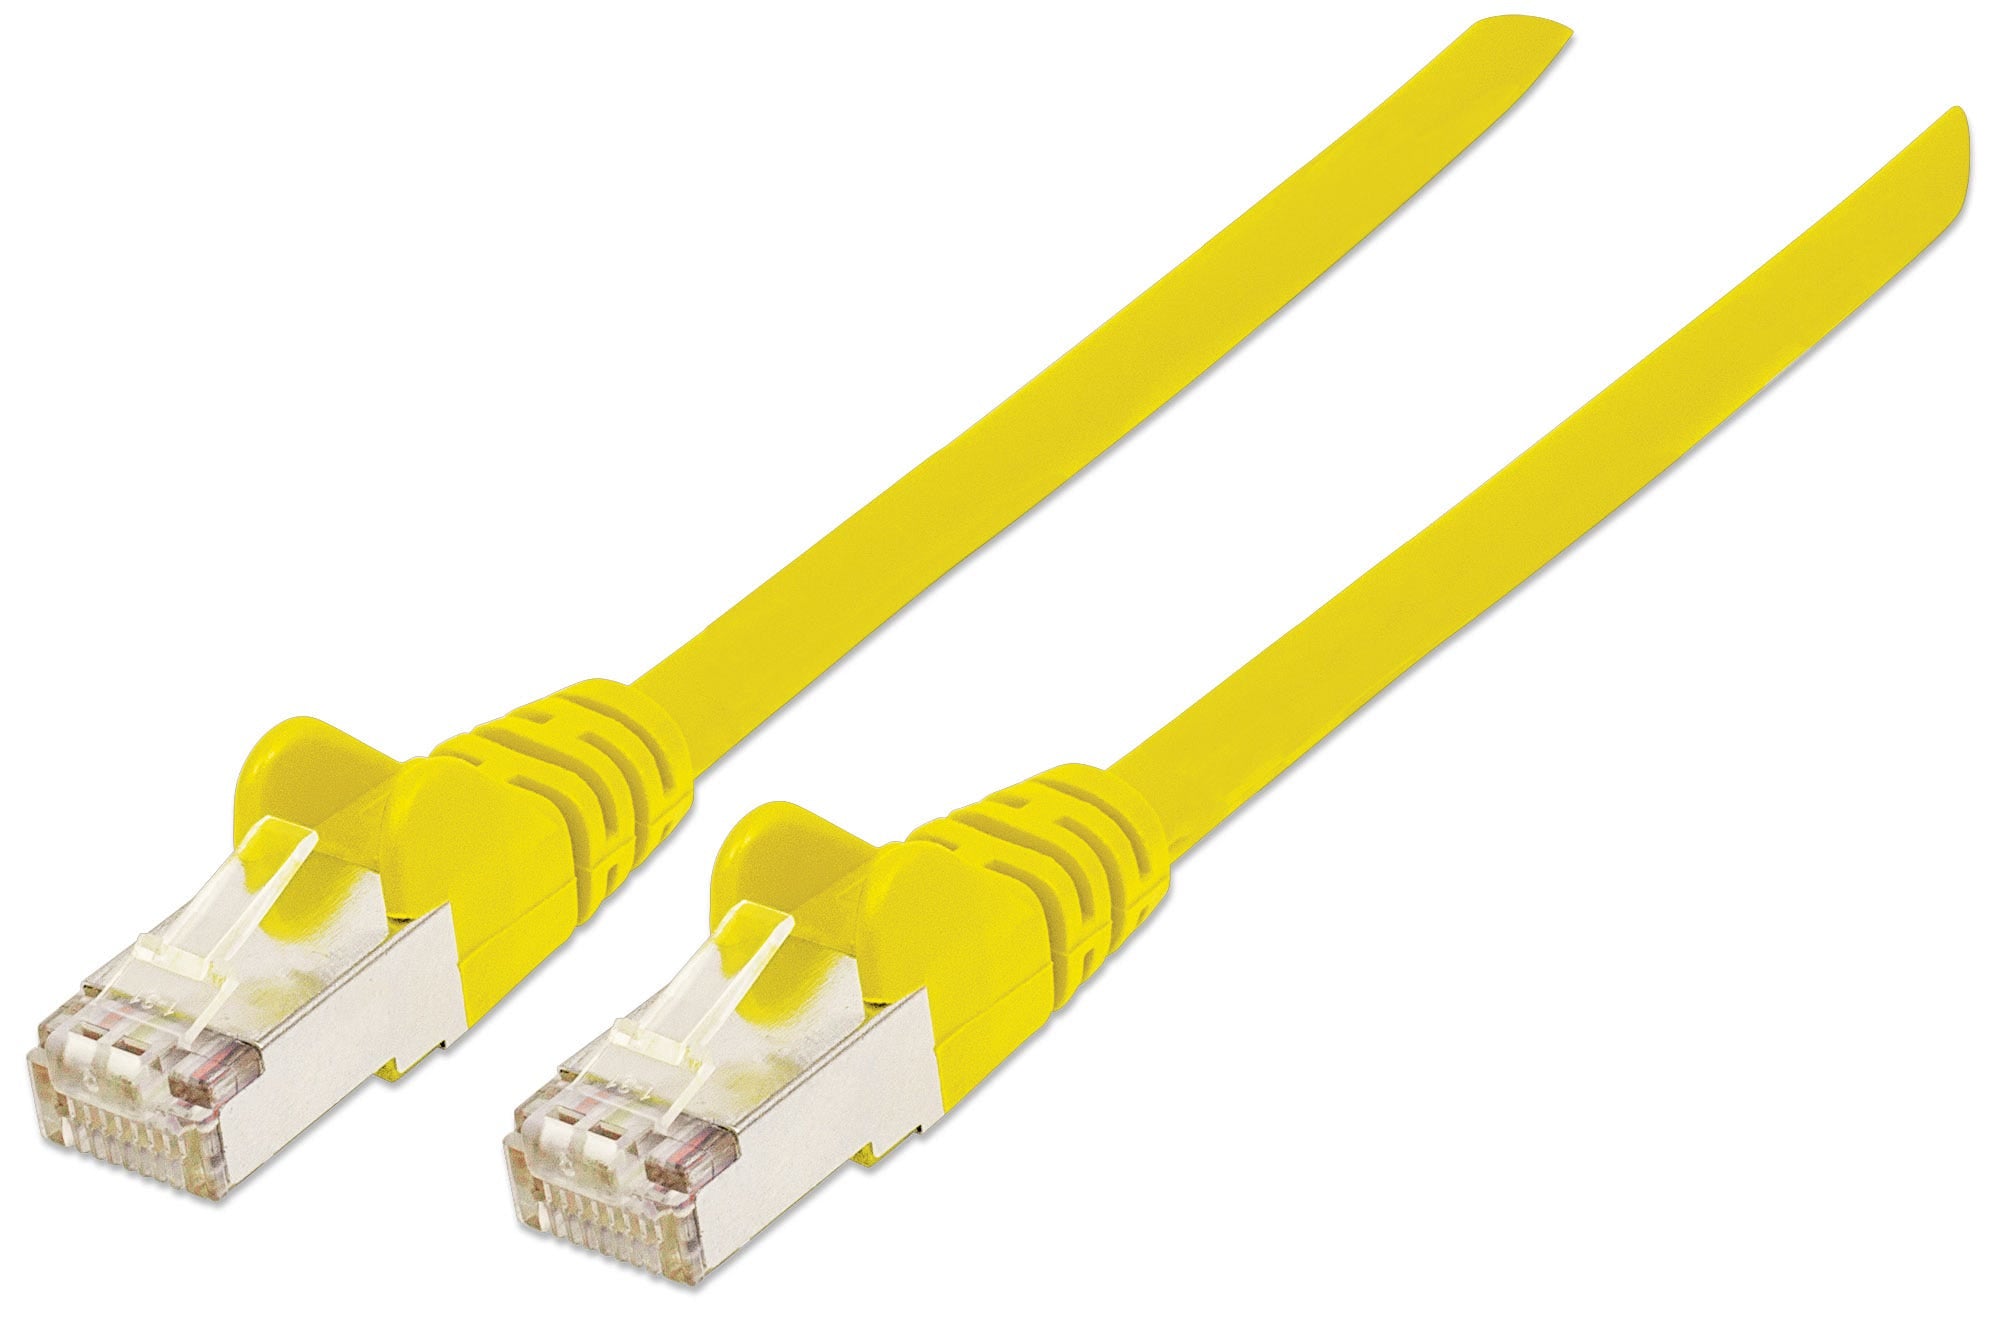 Intellinet Network Patch Cable, Cat6, 1m, Yellow, Copper, S/FTP, LSOH / LSZH, PVC, RJ45, Gold Plated Contacts, Snagless, Booted, Lifetime Warranty, Polybag